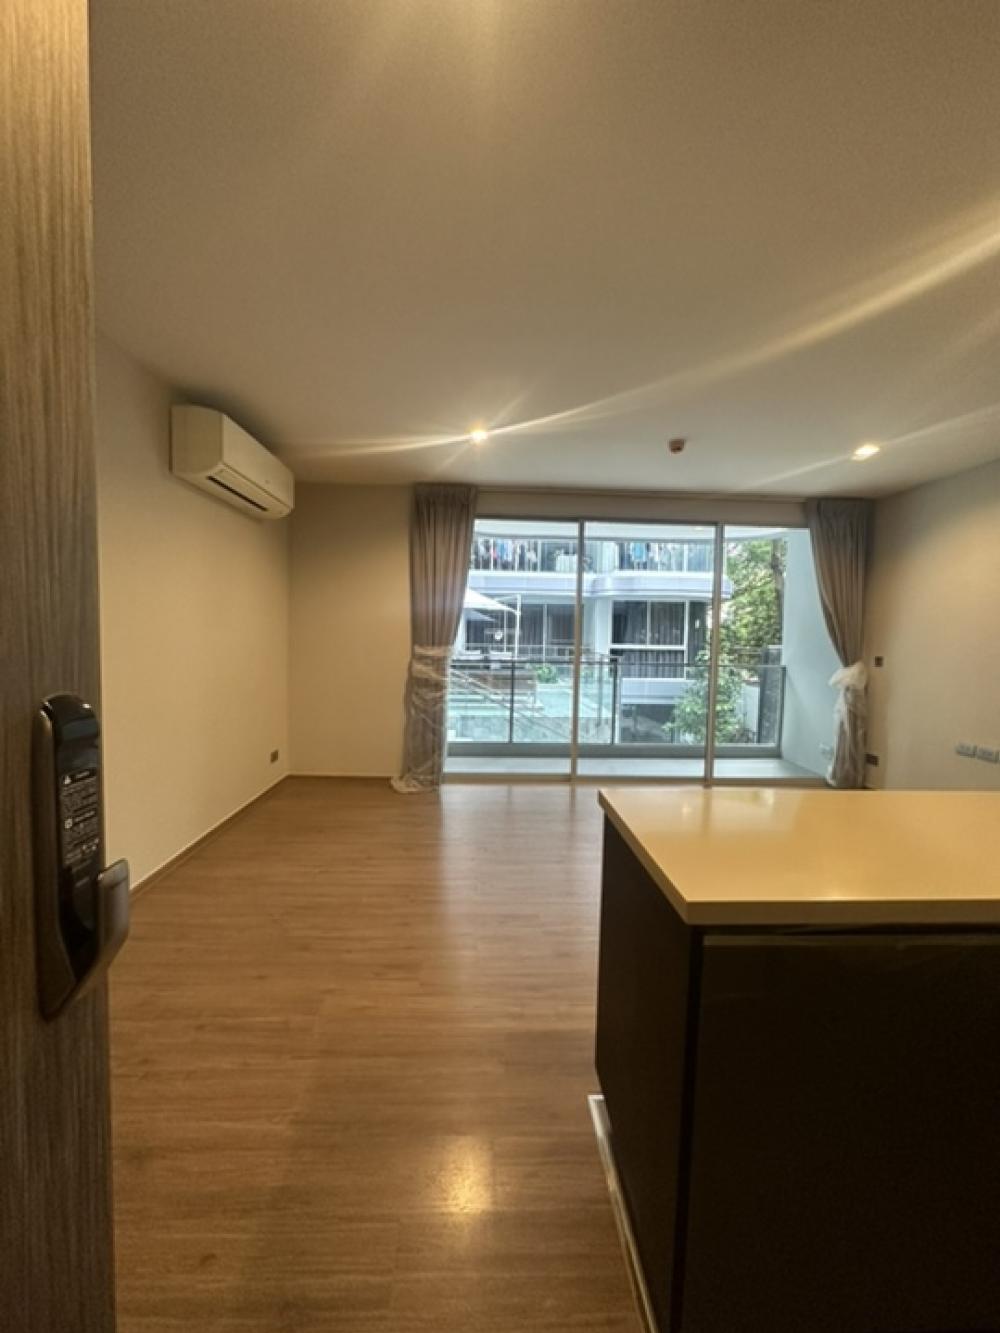 For SaleCondoSukhumvit, Asoke, Thonglor : For sale Condo for sale near SWU Q prasarnmit (Q Prasarnmit) 2/2 bed 72 sq m, price 9,490,000 baht, free common fees for 5 years.